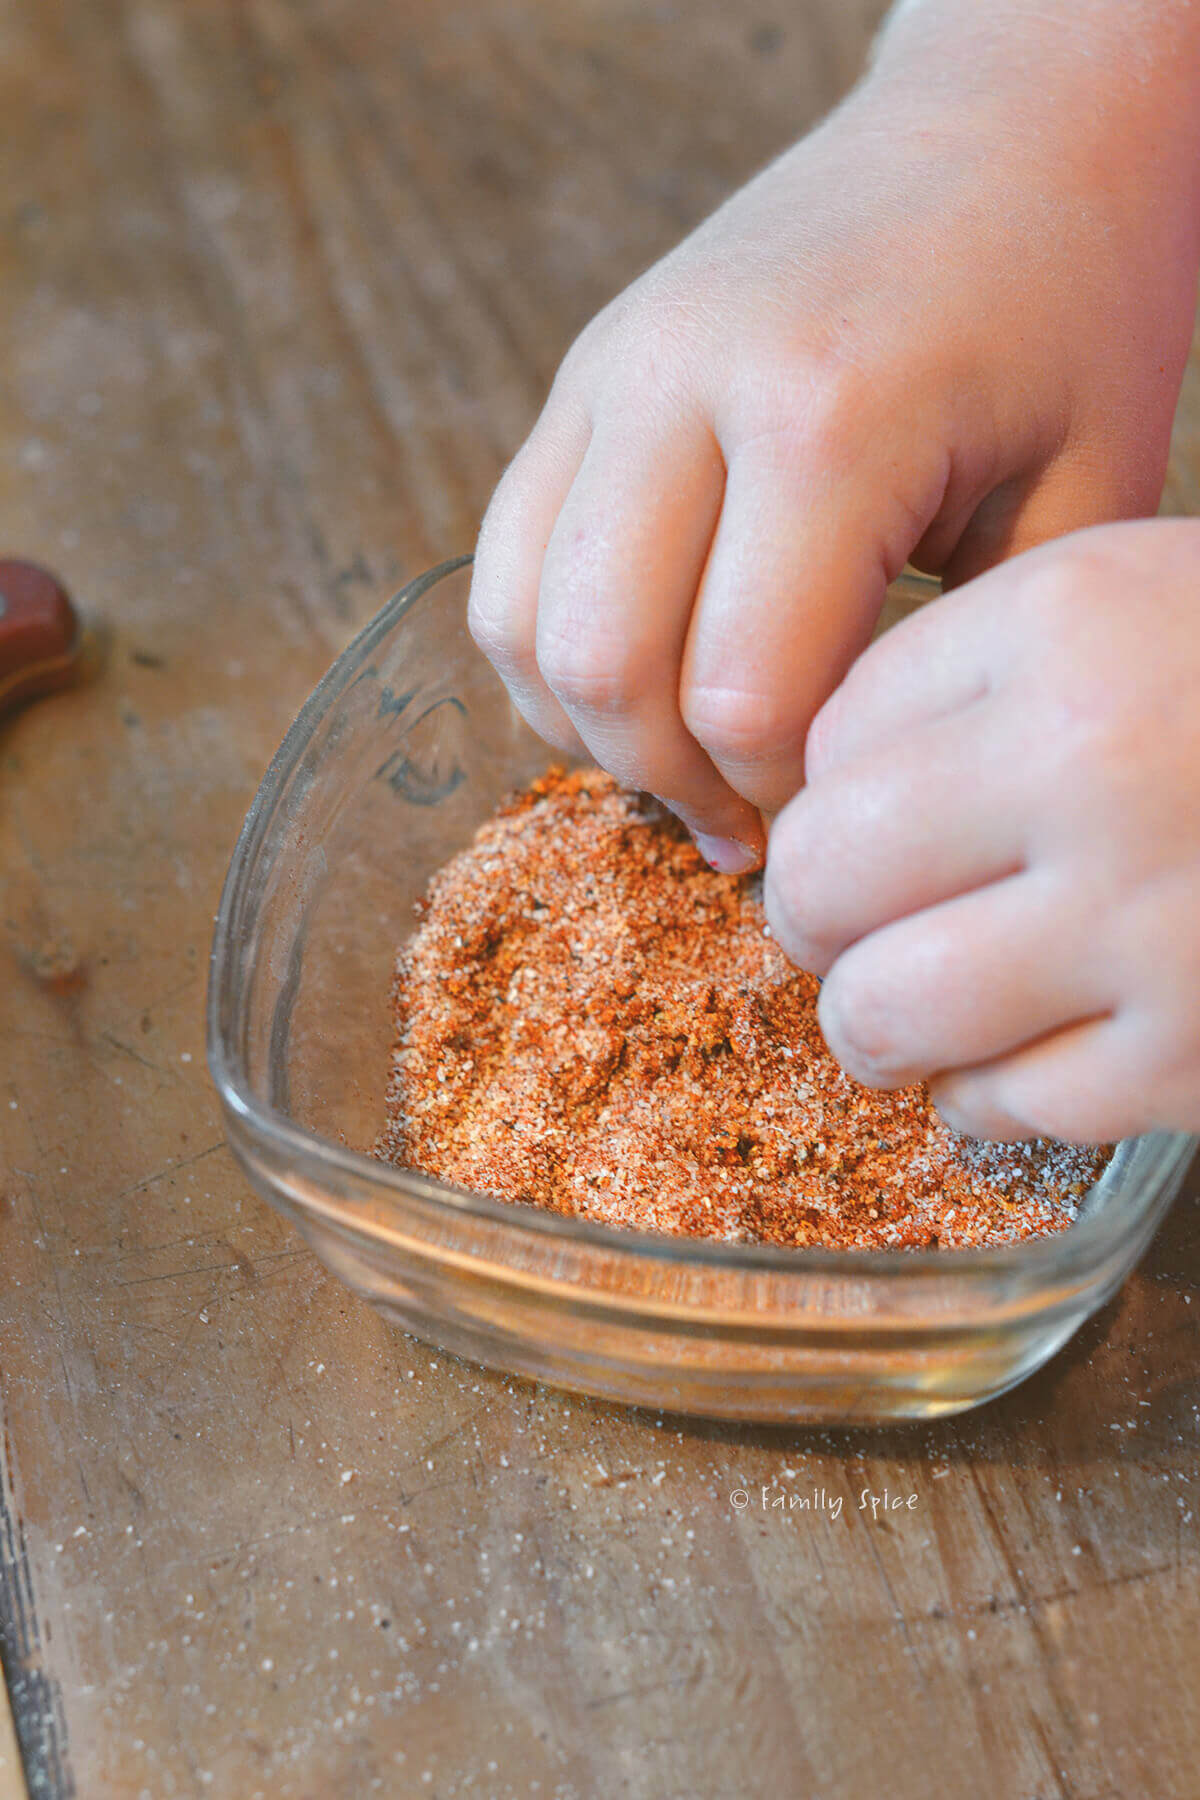 A child's hand mixing up seasonings